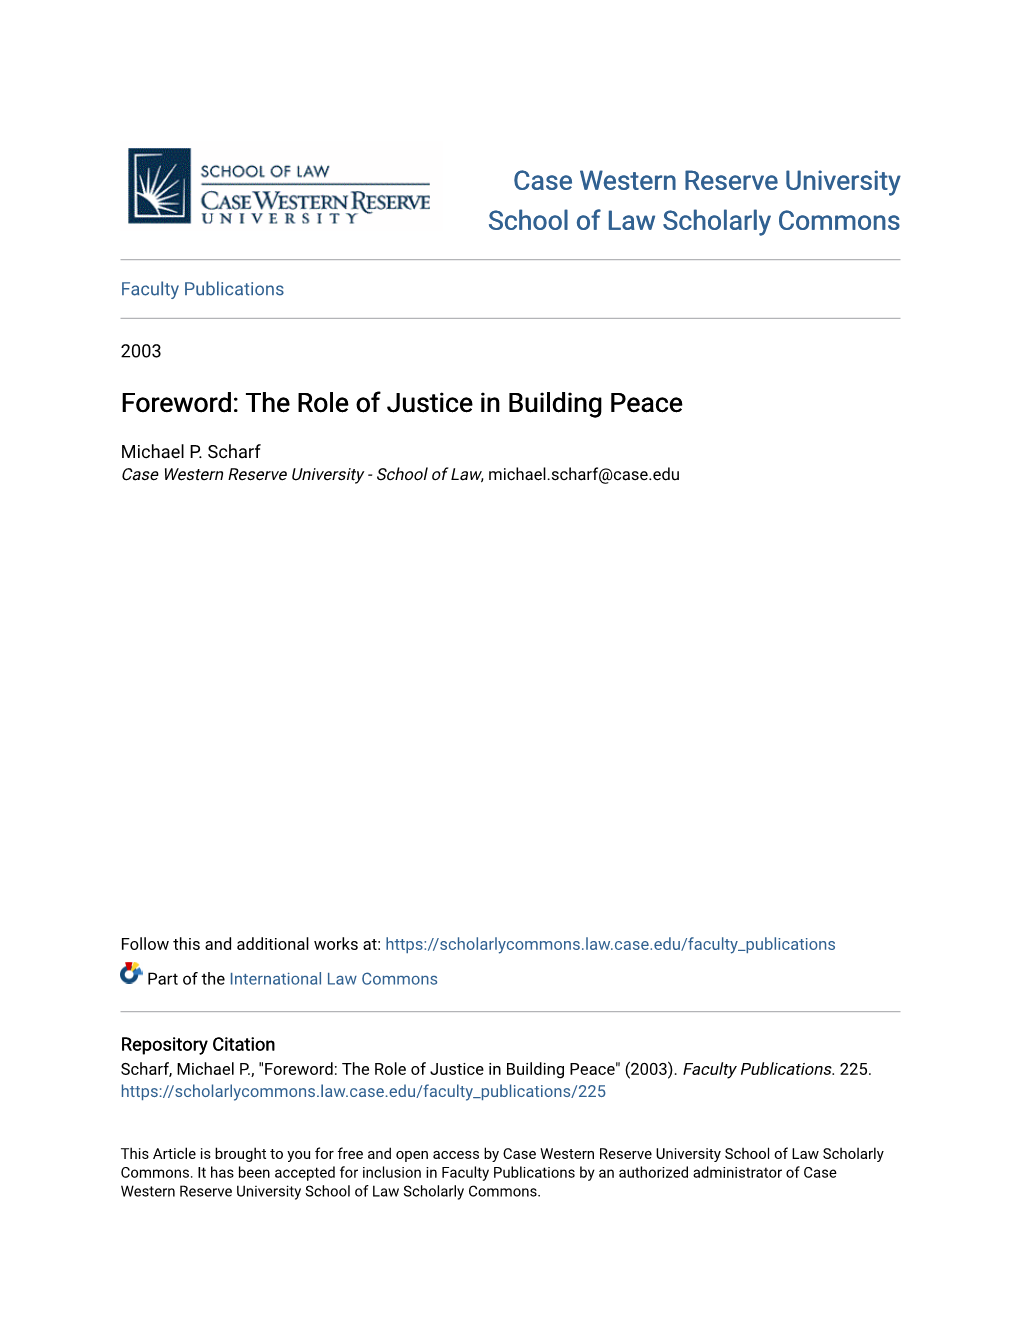 Foreword: the Role of Justice in Building Peace